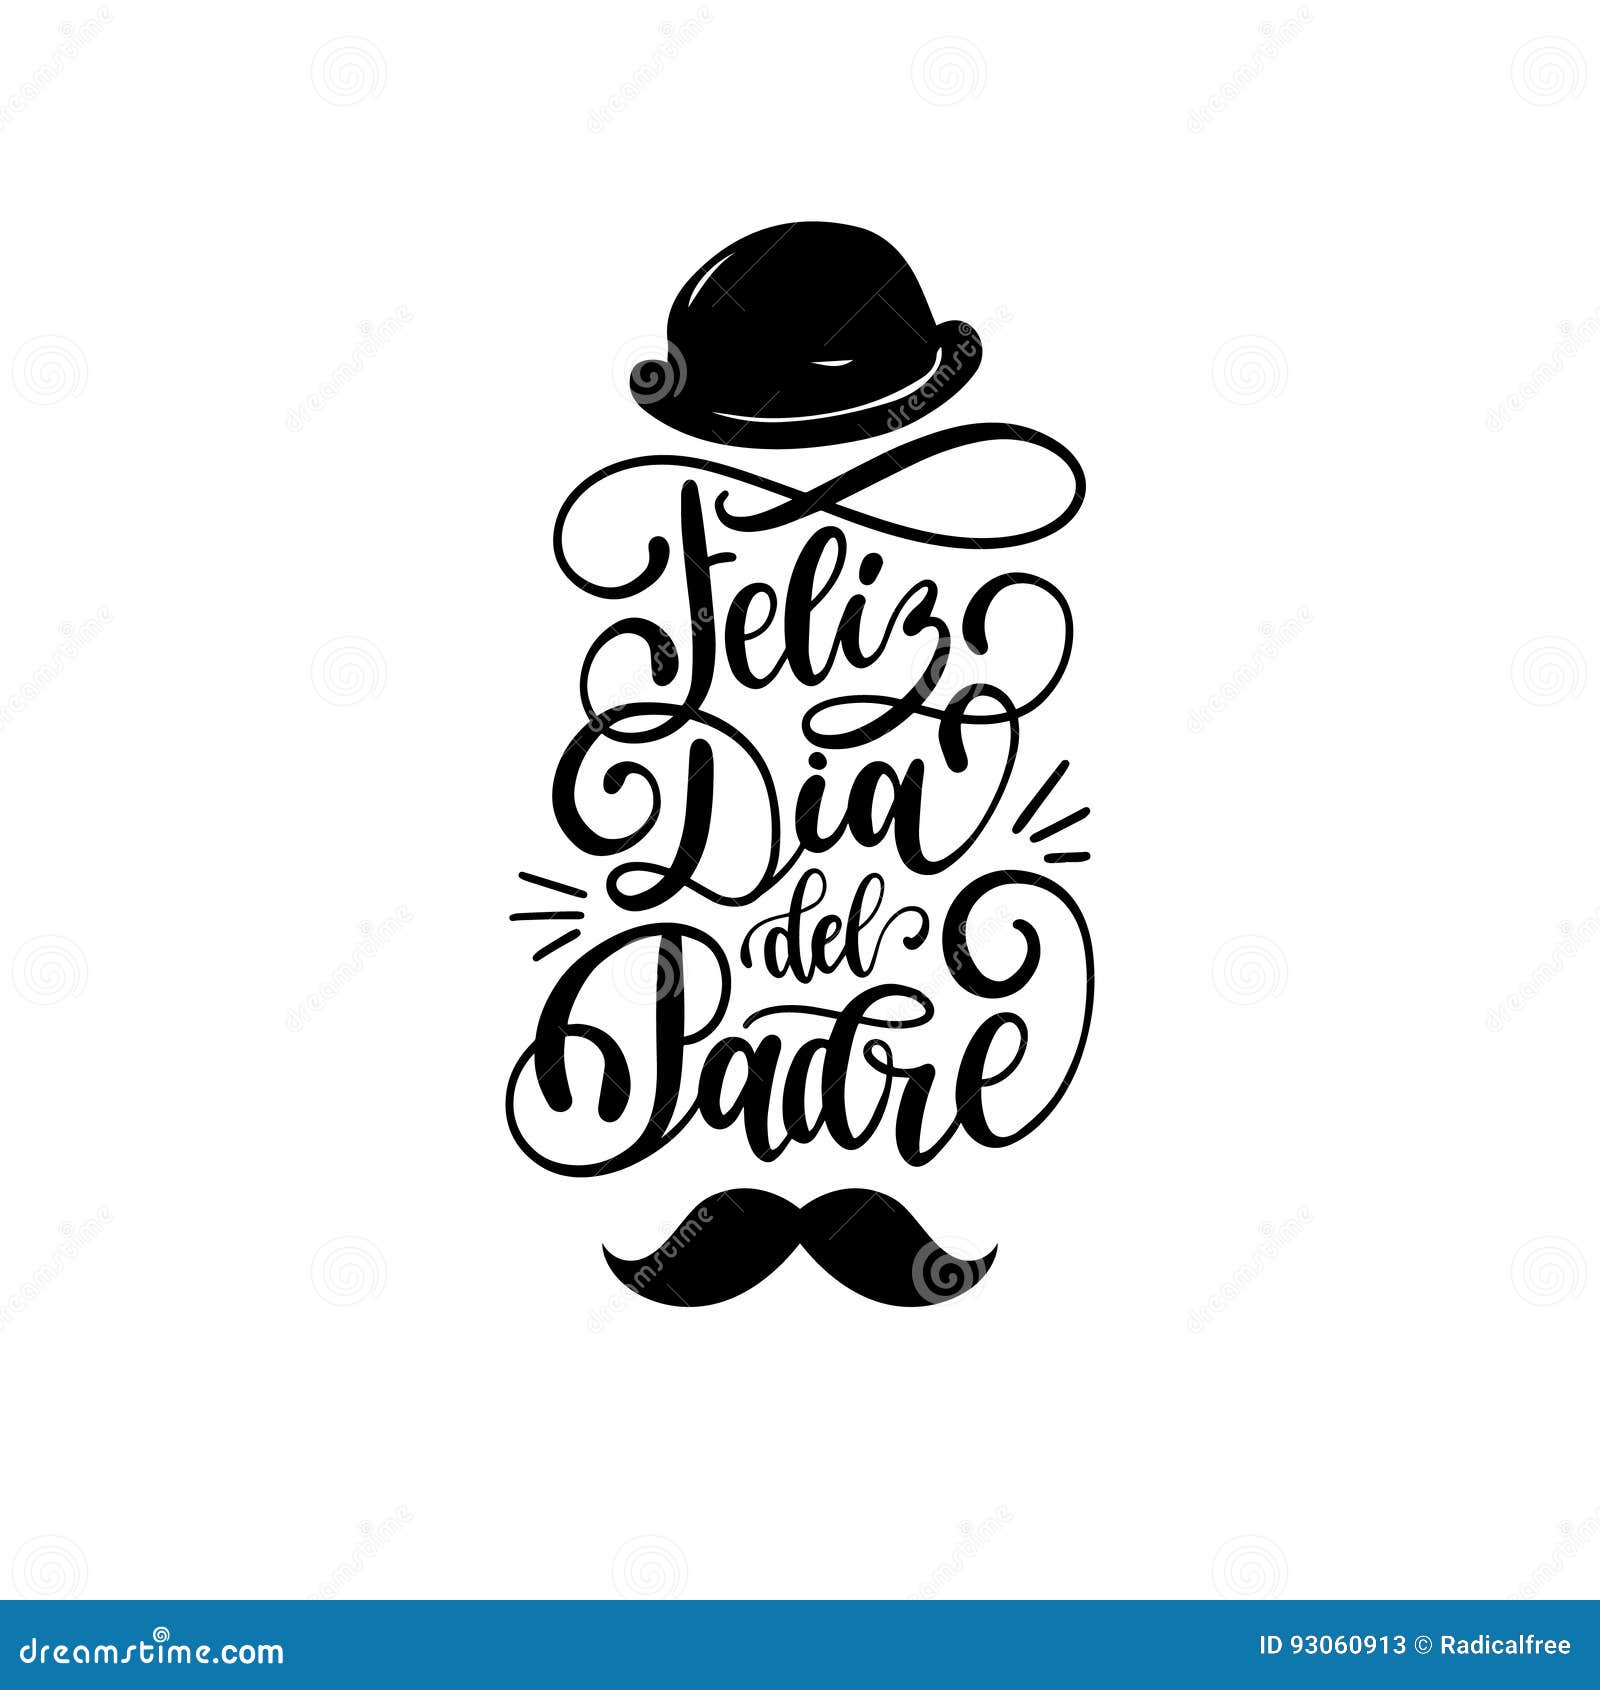 Feliz Dia Del Padre, Spanish Translation of Happy Fathers Day Calligraphic  Inscription for Greeting Card, Poster Etc. . Stock Vector - Illustration of  calligraphic, poster: 93060913